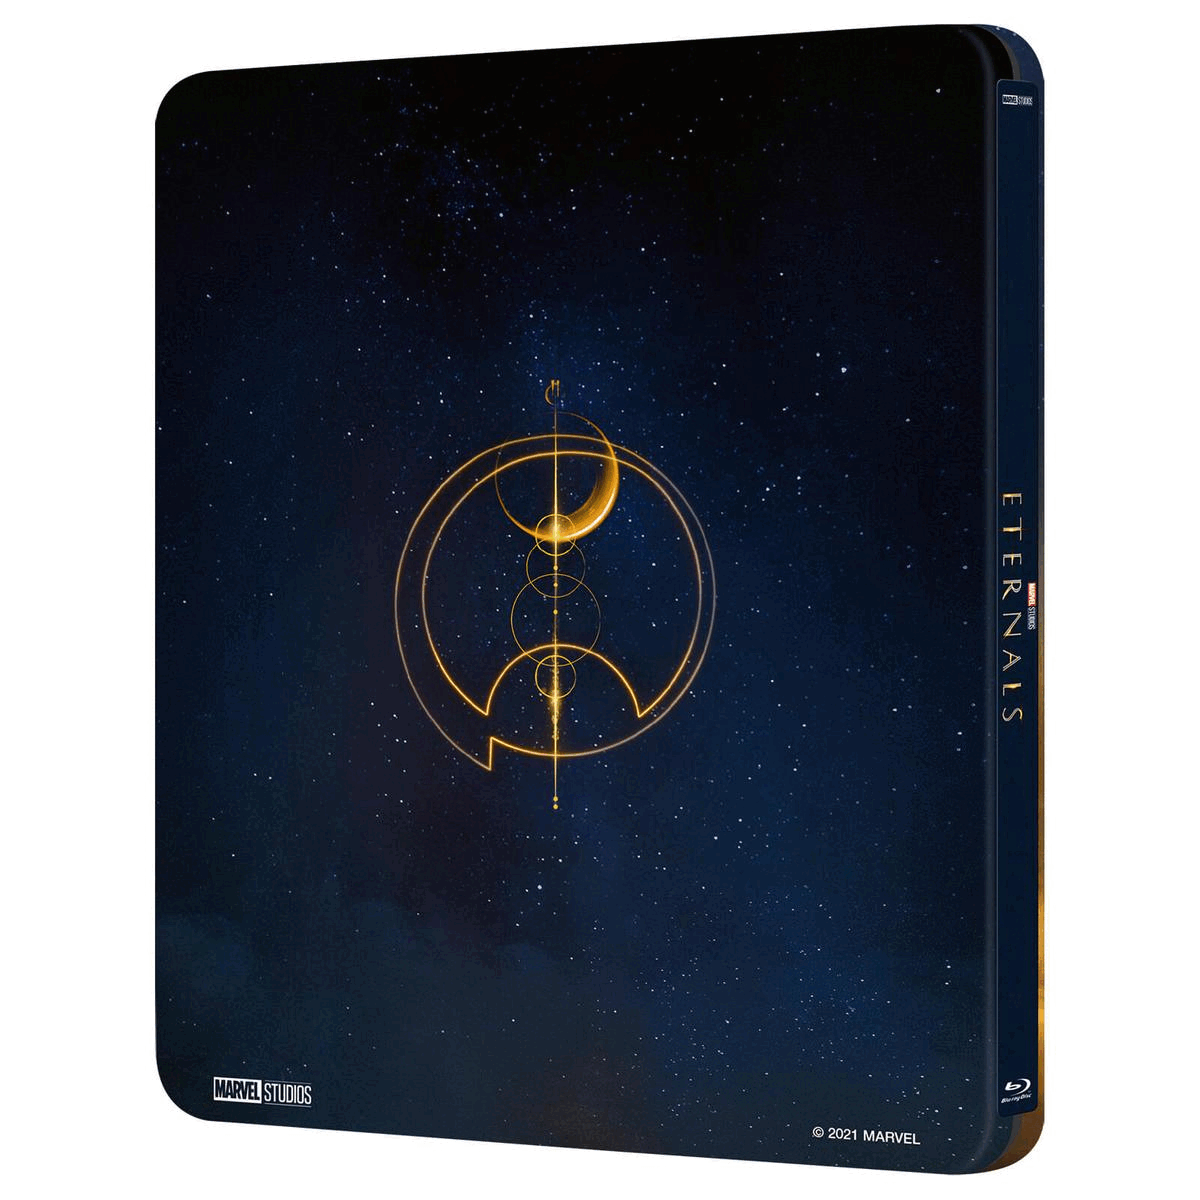 Gif showing multiple images of the steelbook in a continuous loop